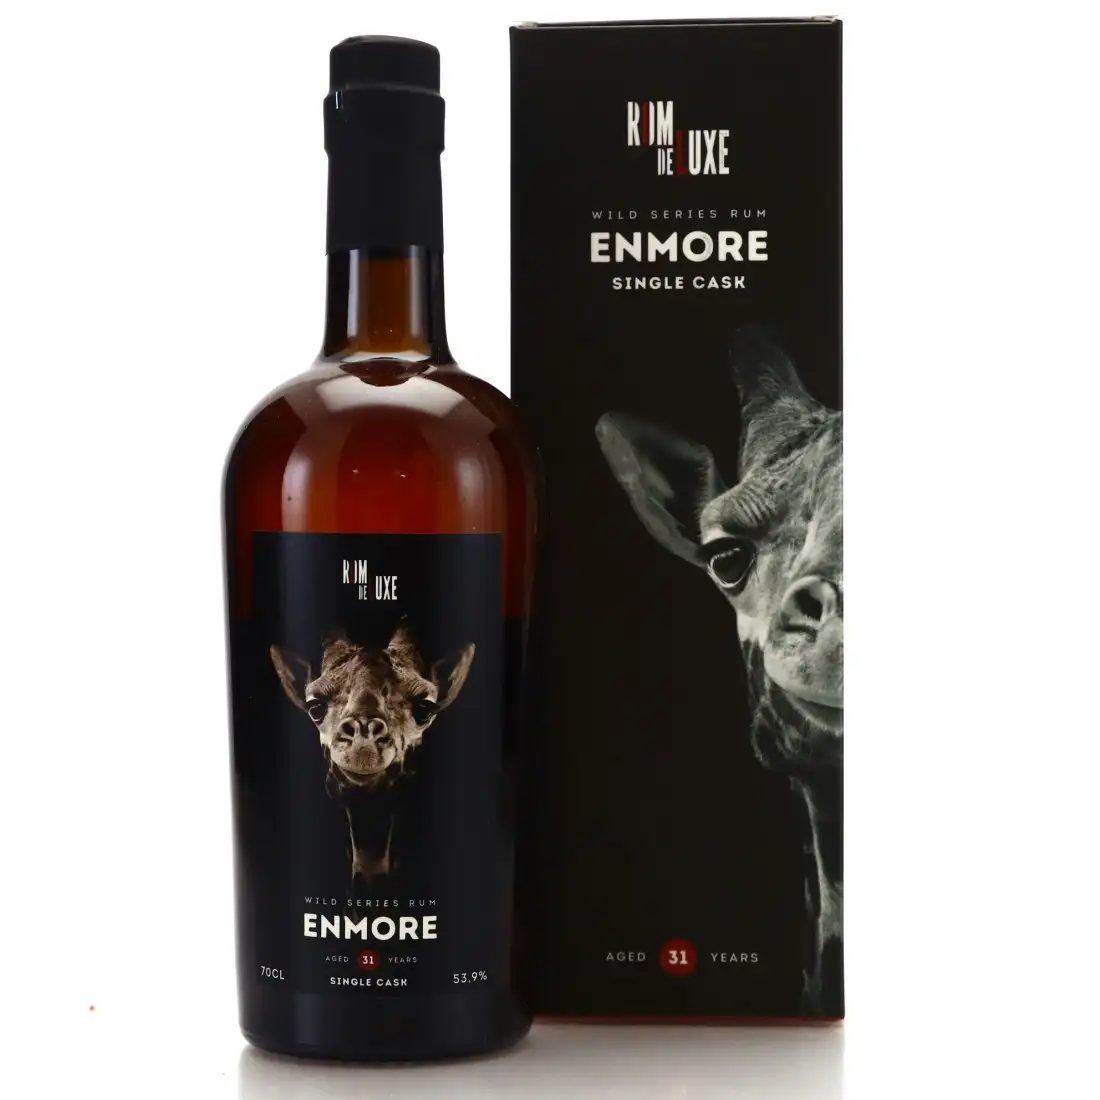 Image of the front of the bottle of the rum Wild Series Rum Enmore No. 27 (batch 2) MEV